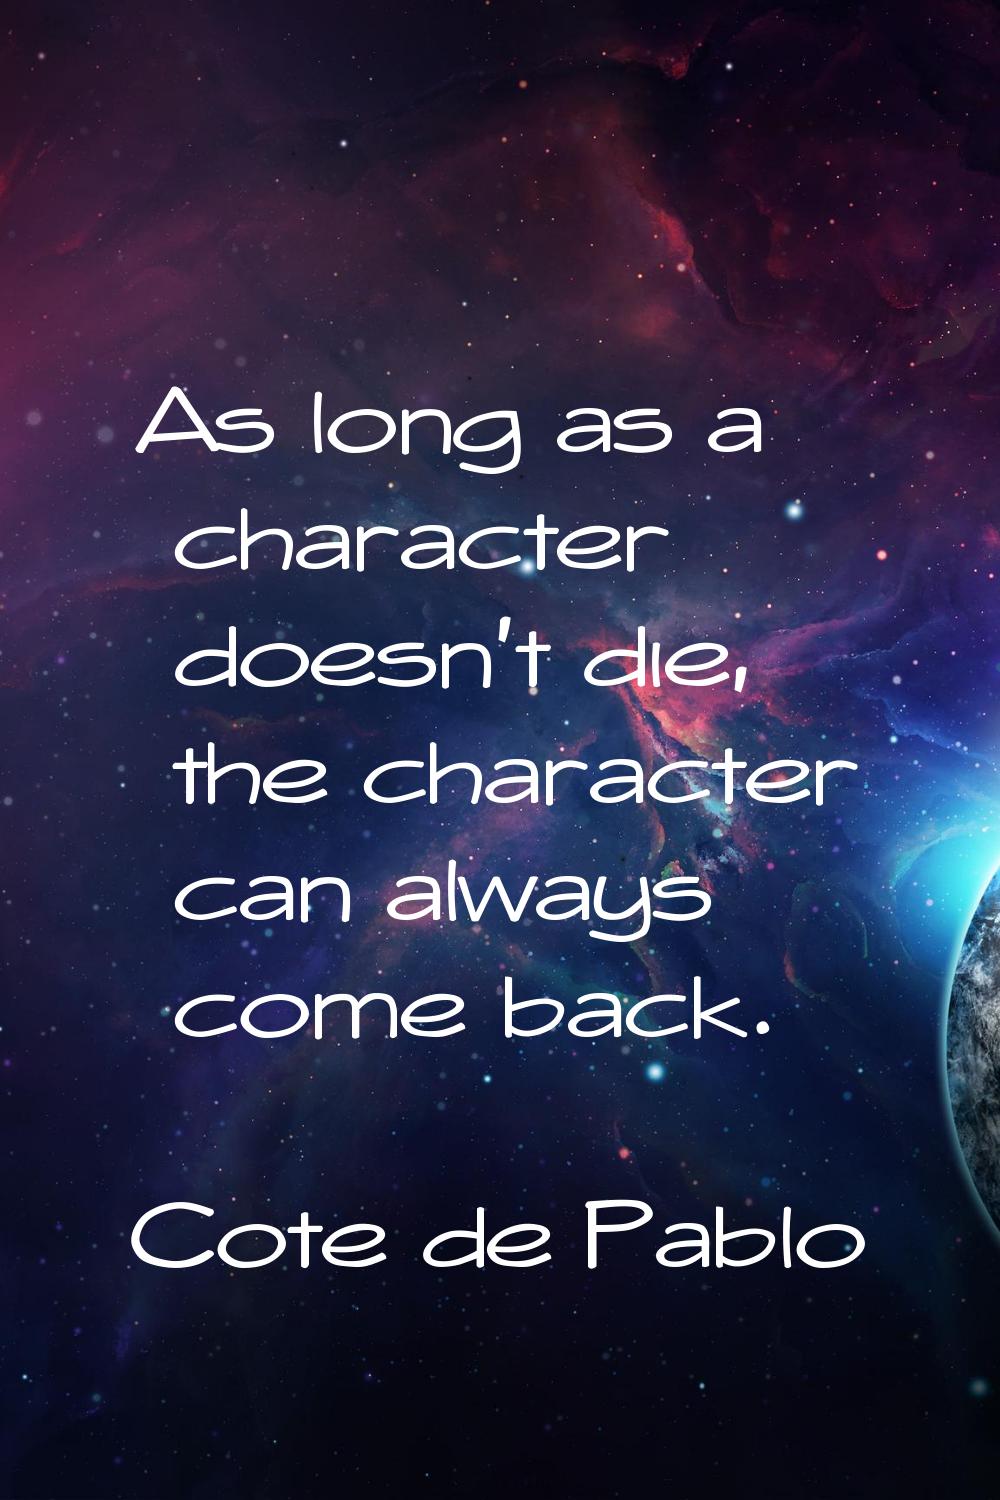 As long as a character doesn't die, the character can always come back.